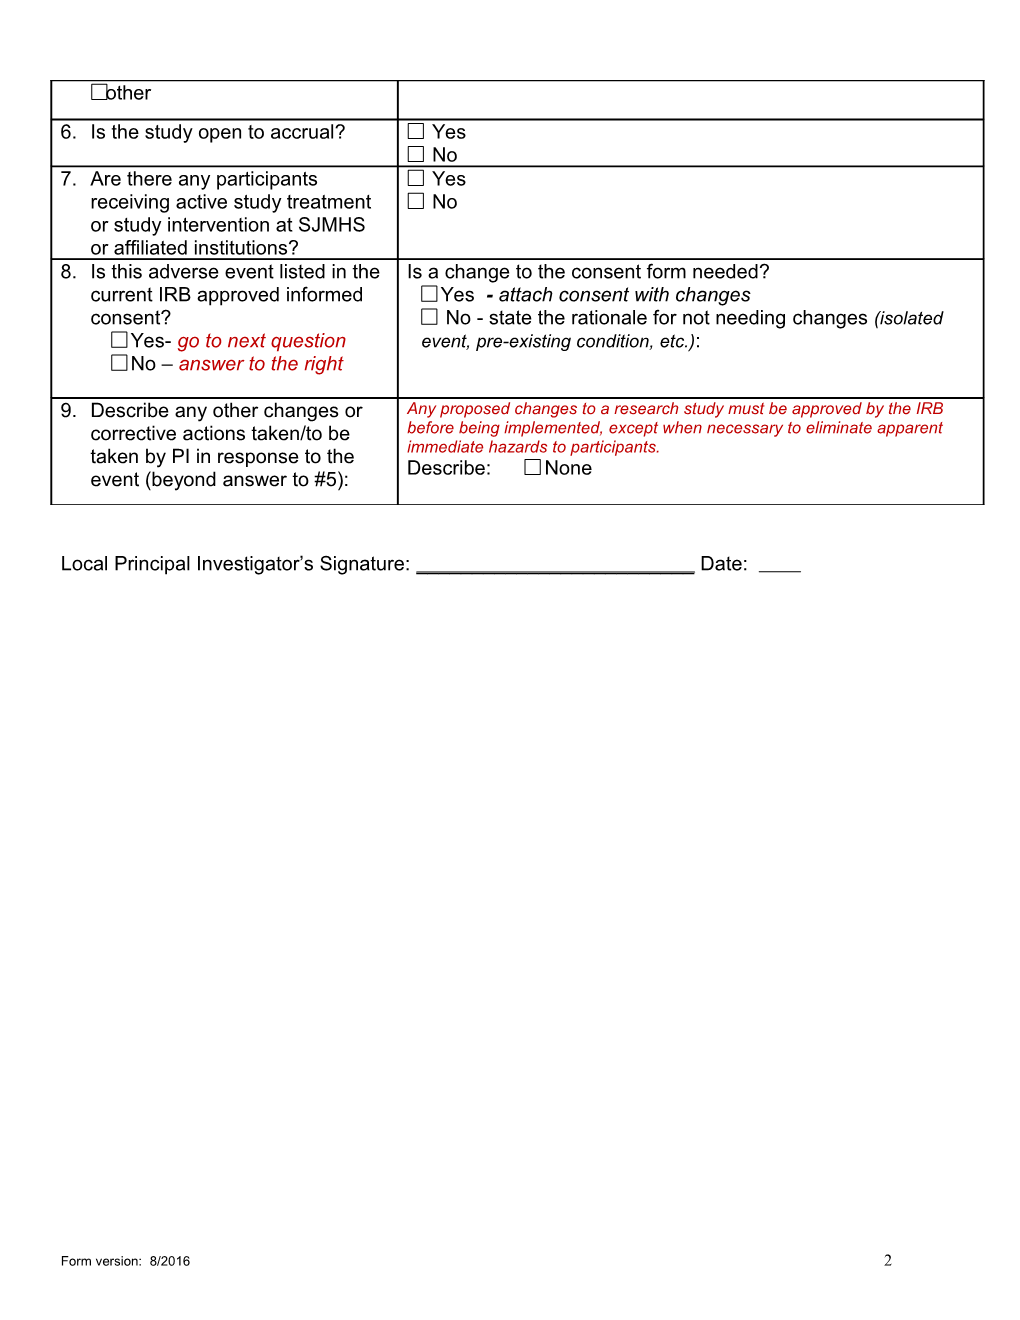 Internal Adverse Event and Unanticipated Problem Form